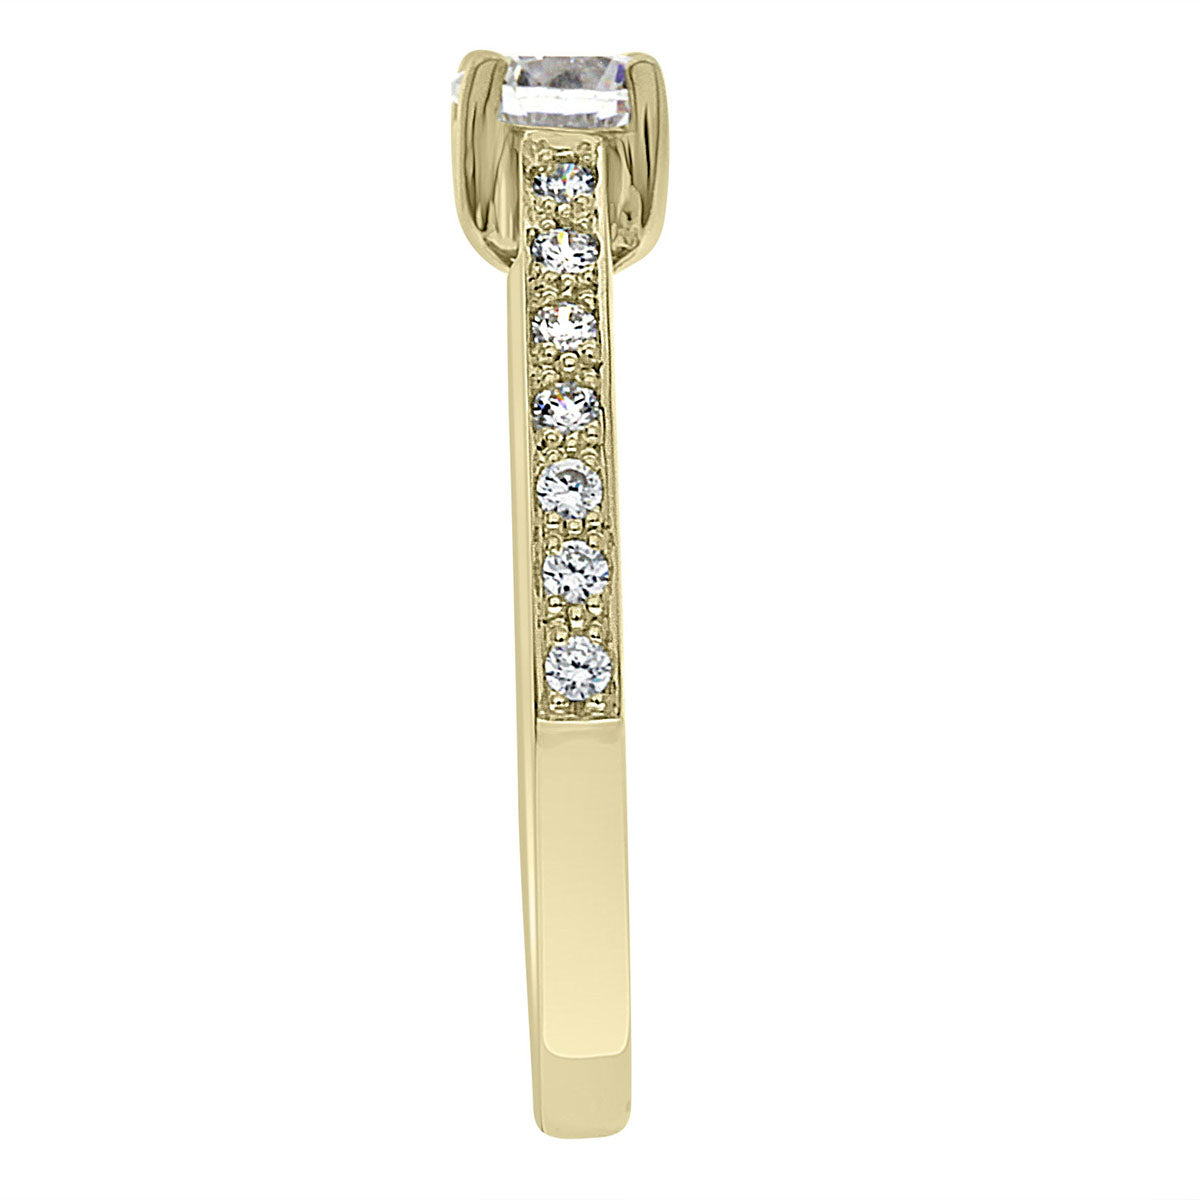 Pavé Diamond Ring manufactured in yellow gold pictured upright and viewed in endview